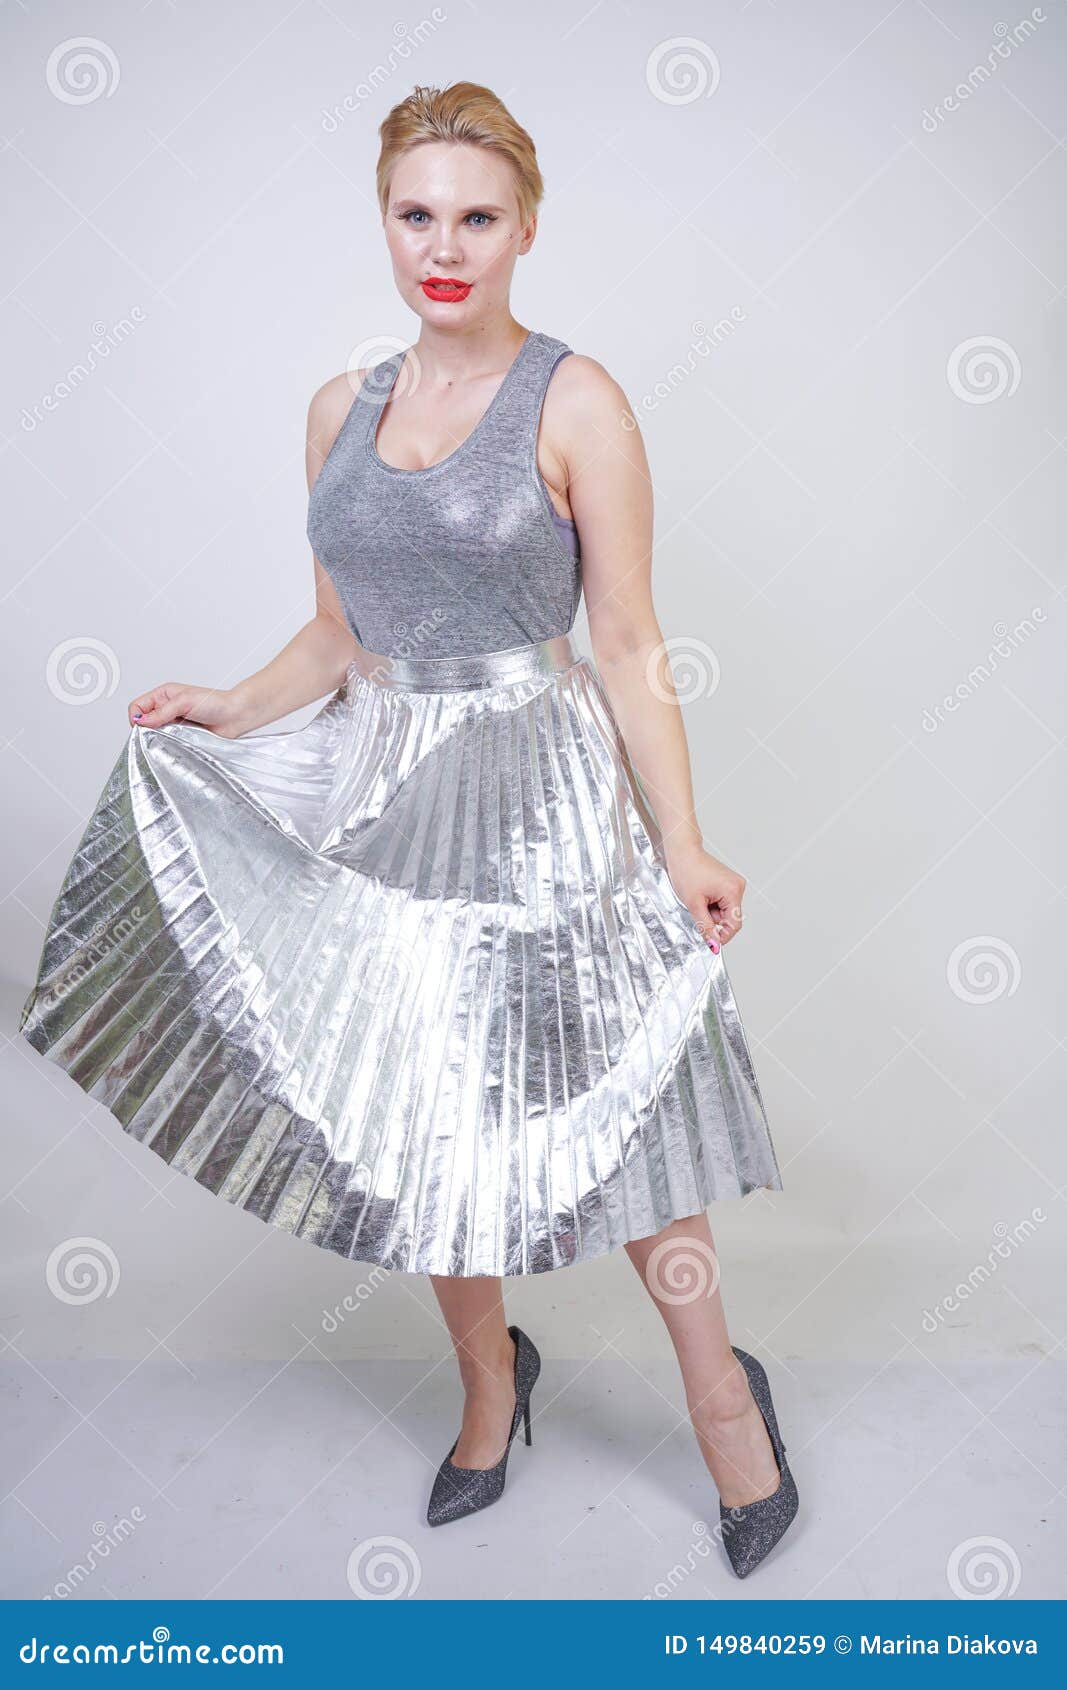 Beautiful Curvy Girl Short Hair in Silver Tank Top and Metallic Pleated Skirt on White Background in Studio. Blonde Pl Stock Image - Image of artistic, isolated: 149840259